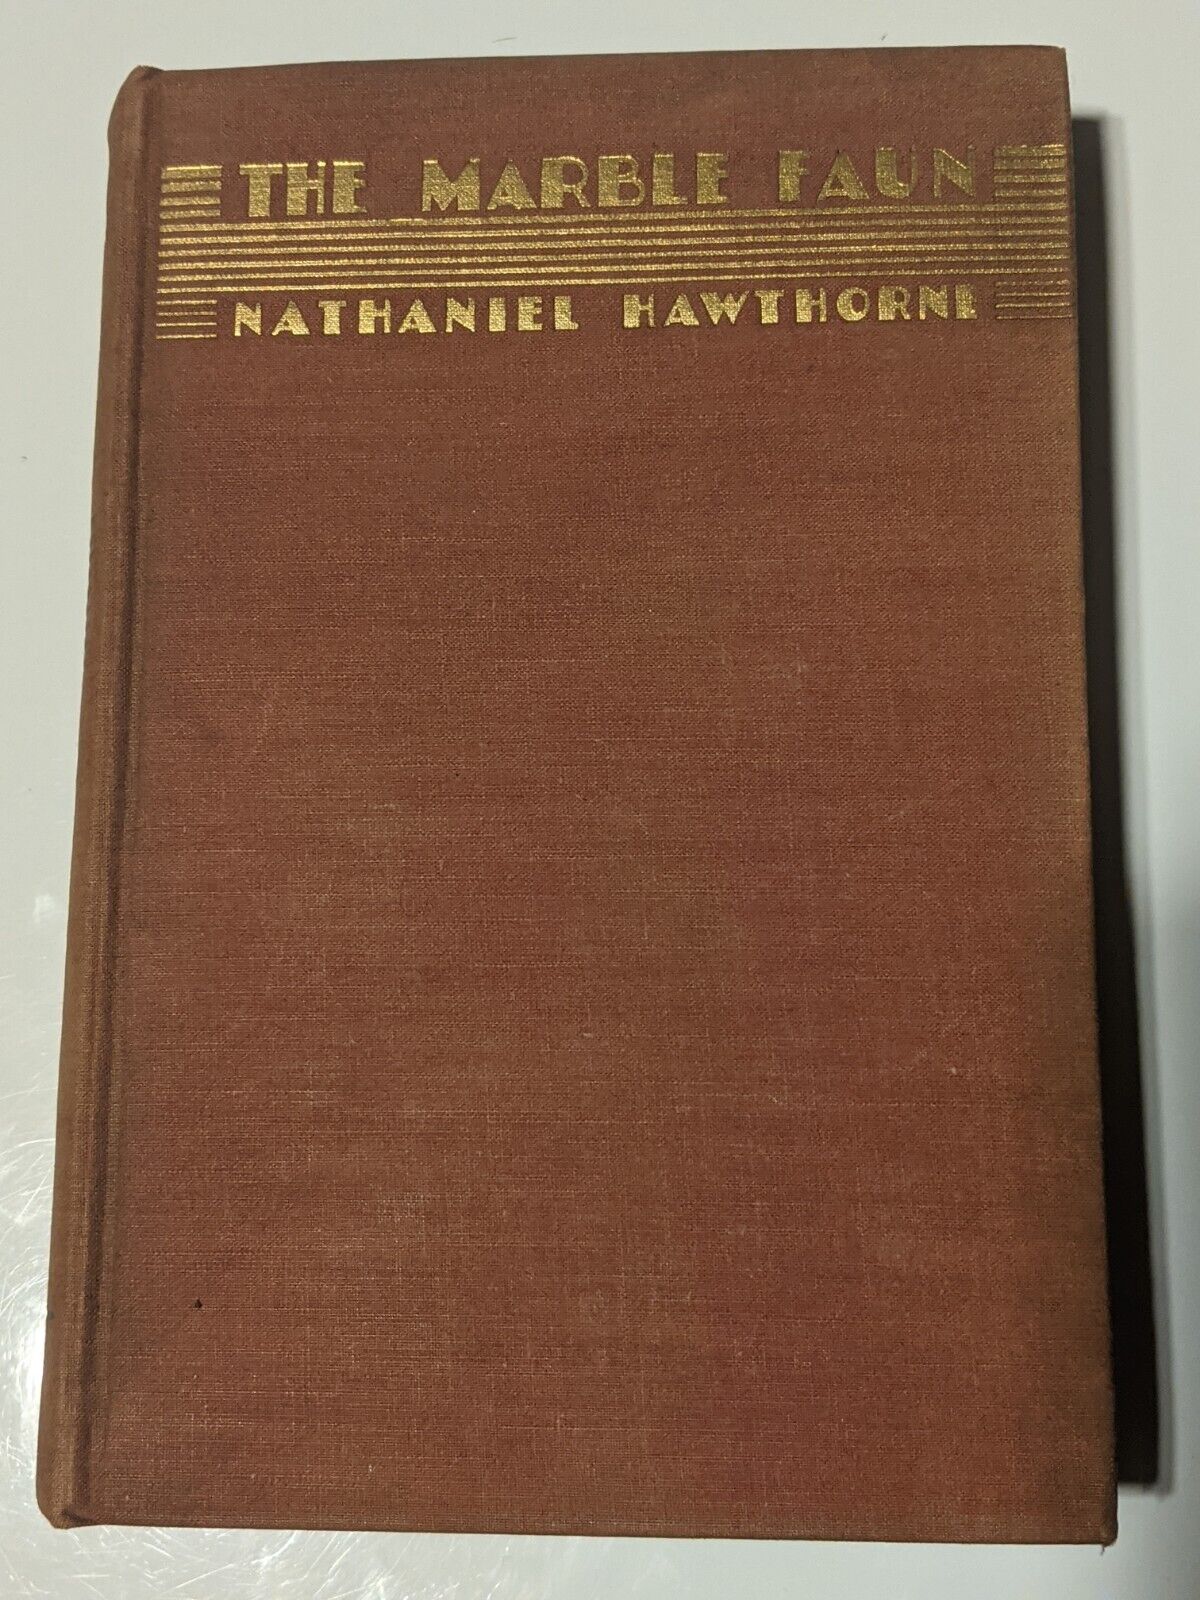 Antique 1931 The Marble Faun by Nathaniel Hawthorne Hardcover